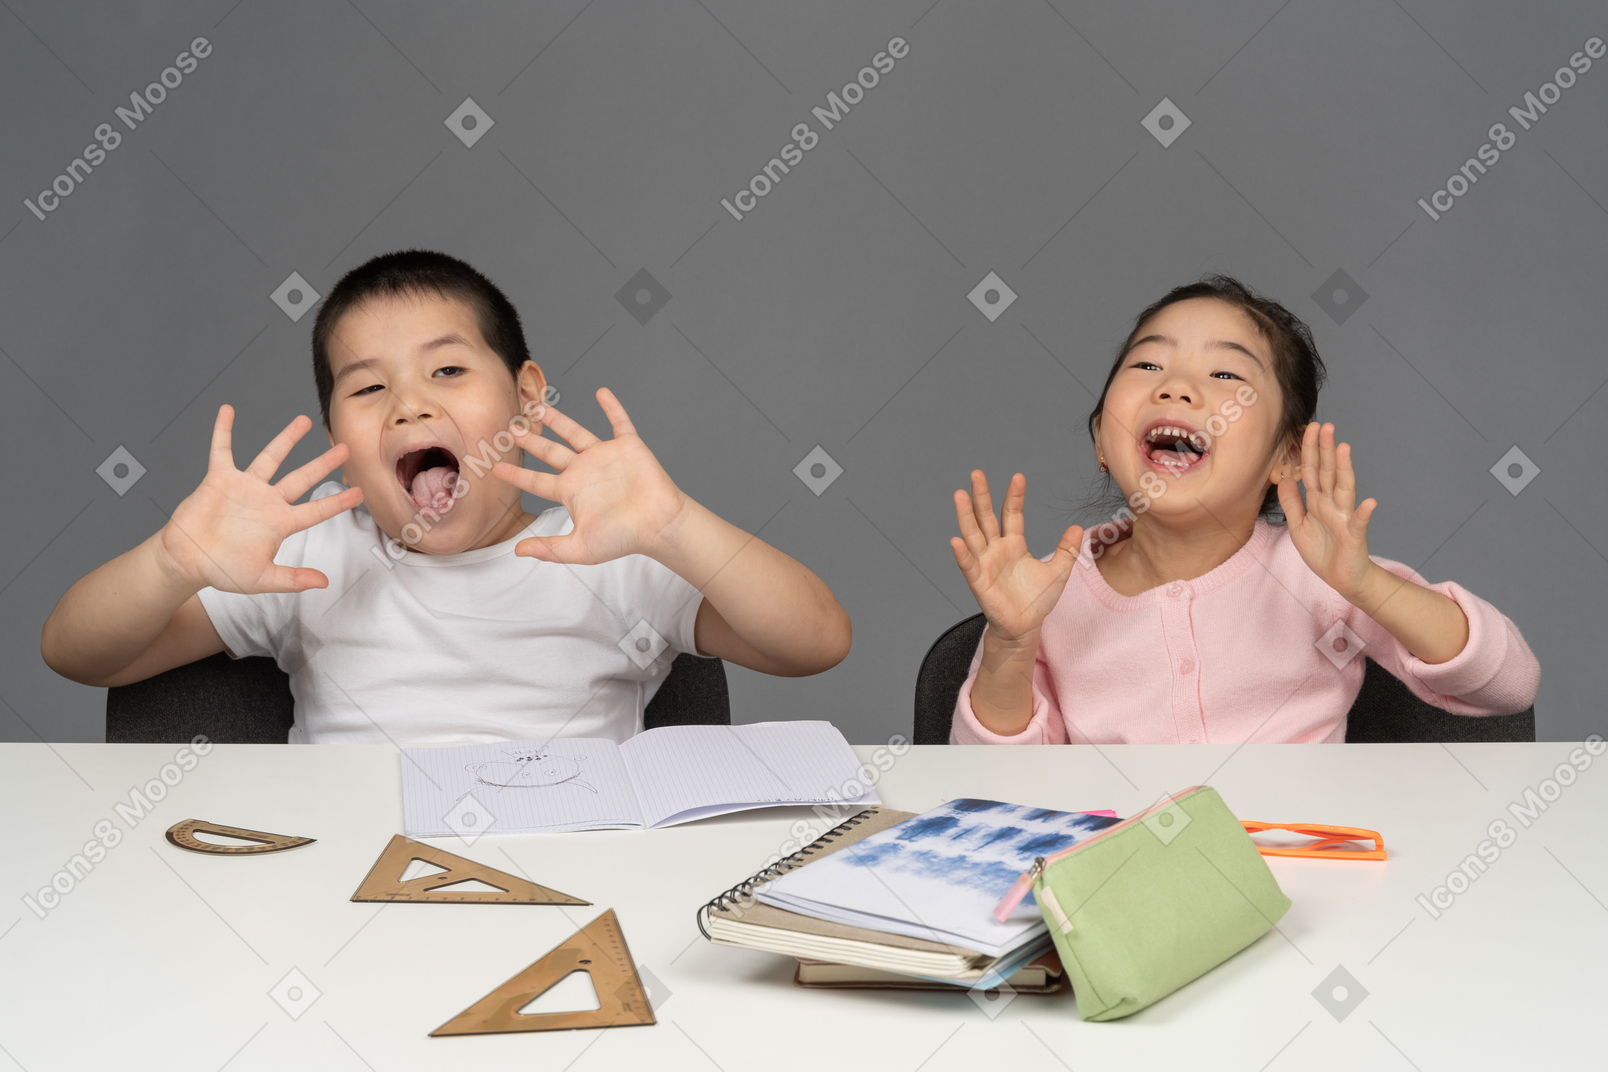 Schoolkids making funny faces